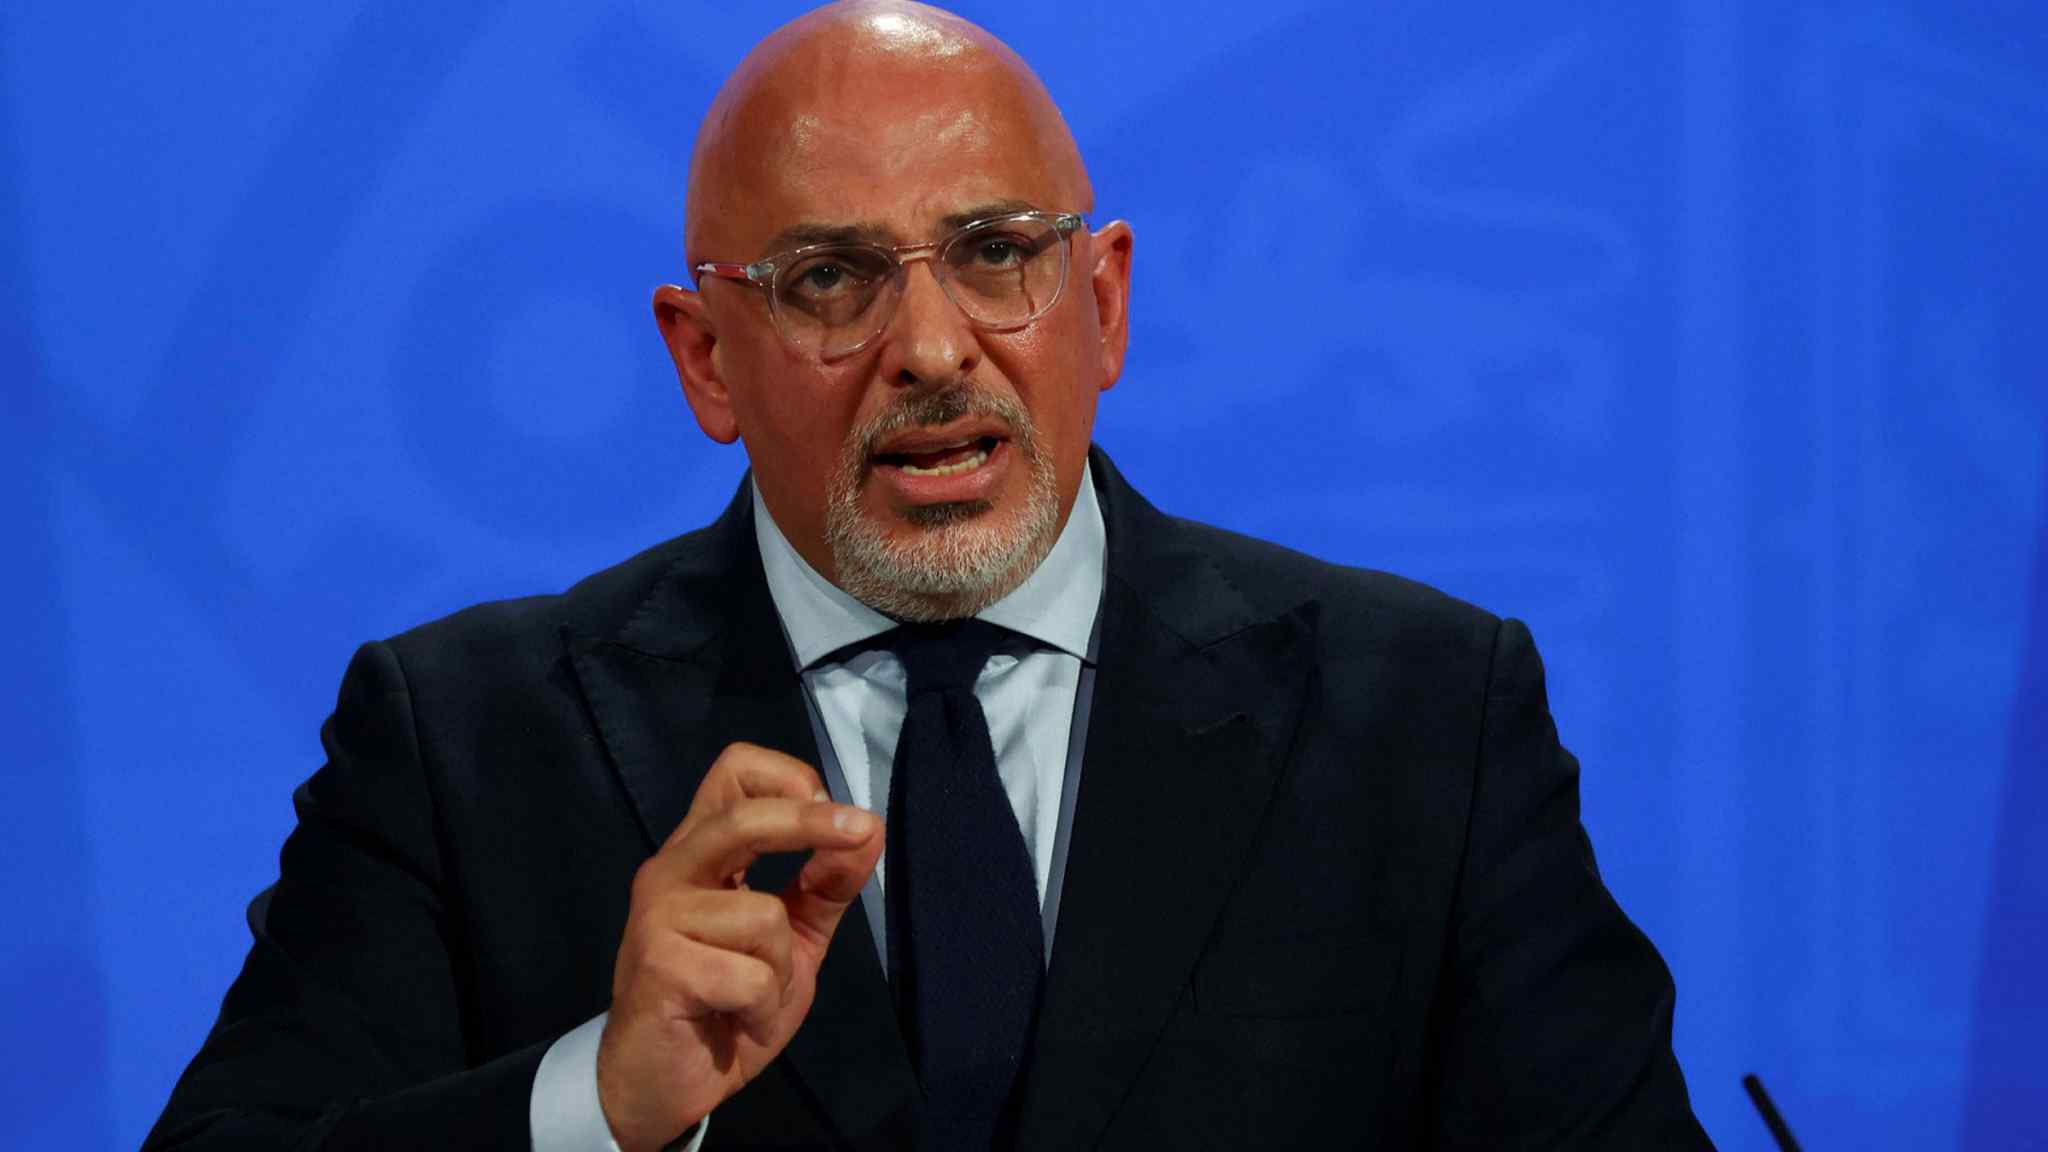 Nadhim Zahawi was ‘instrumental’ in securing Greensill loans approval, says Gupta